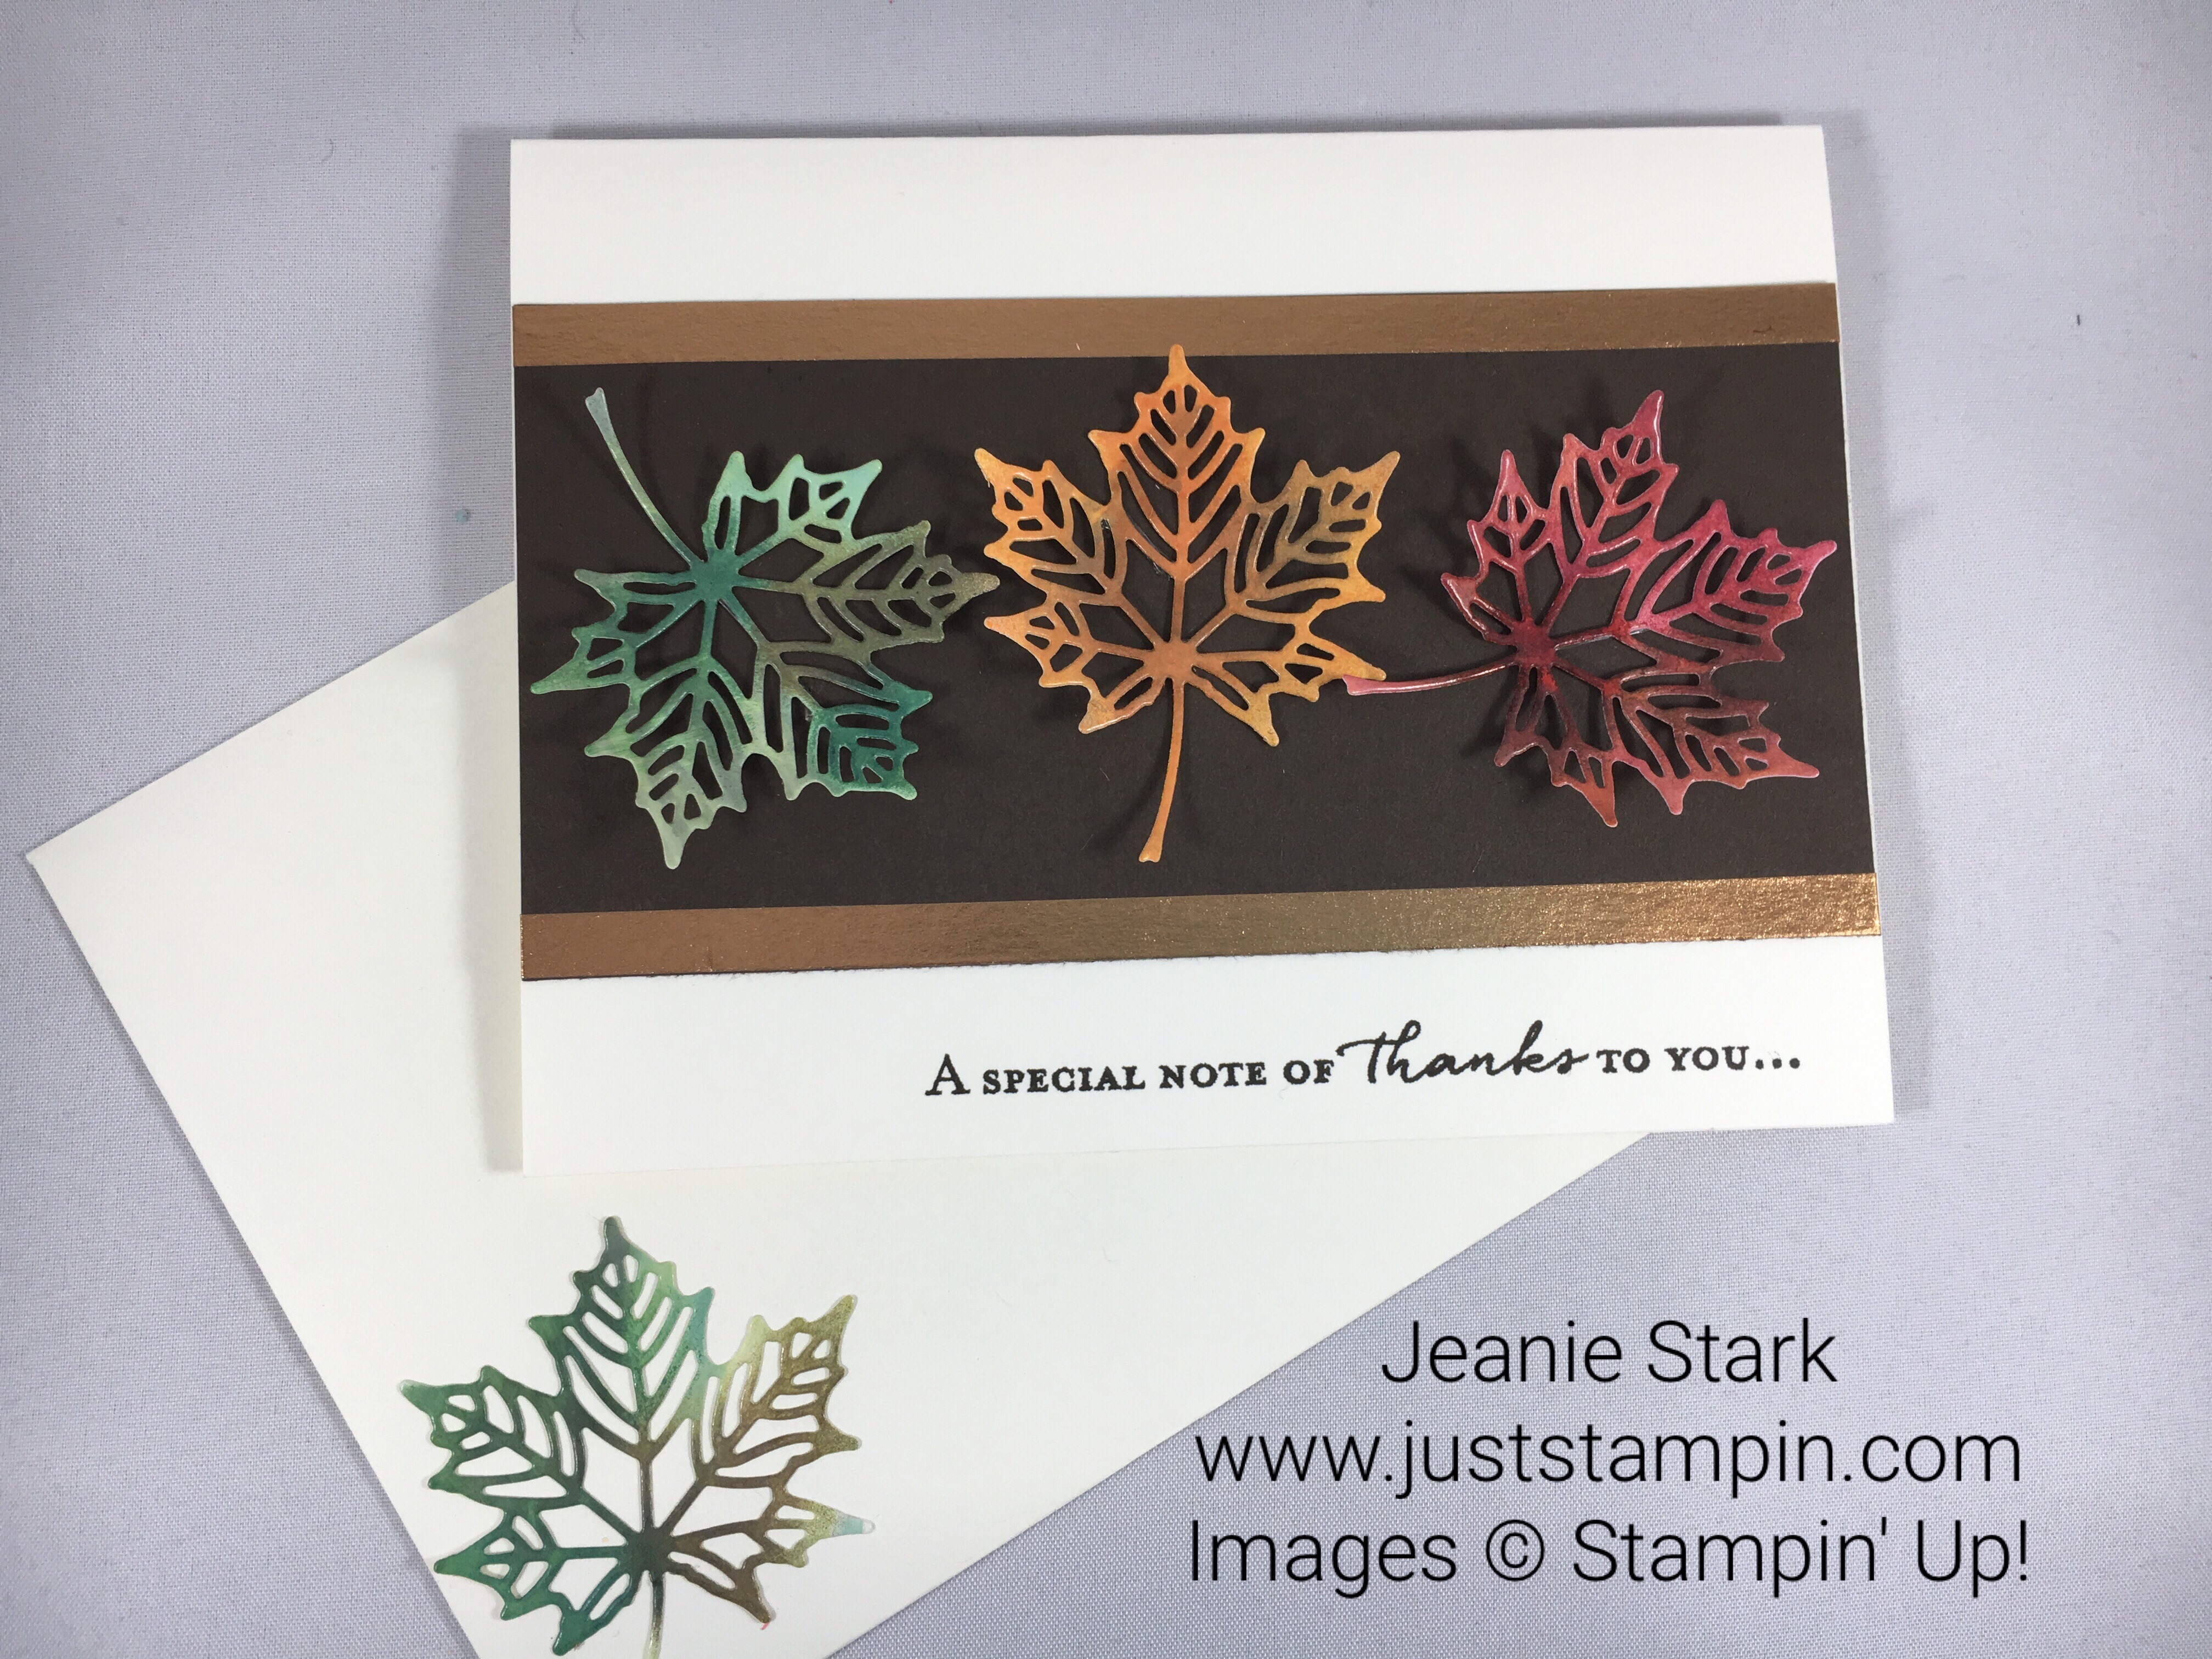 Stampin Up Floral Phrases and Seasonal Layers Fall Thank You Card Idea - Jeanie Stark StampinUp